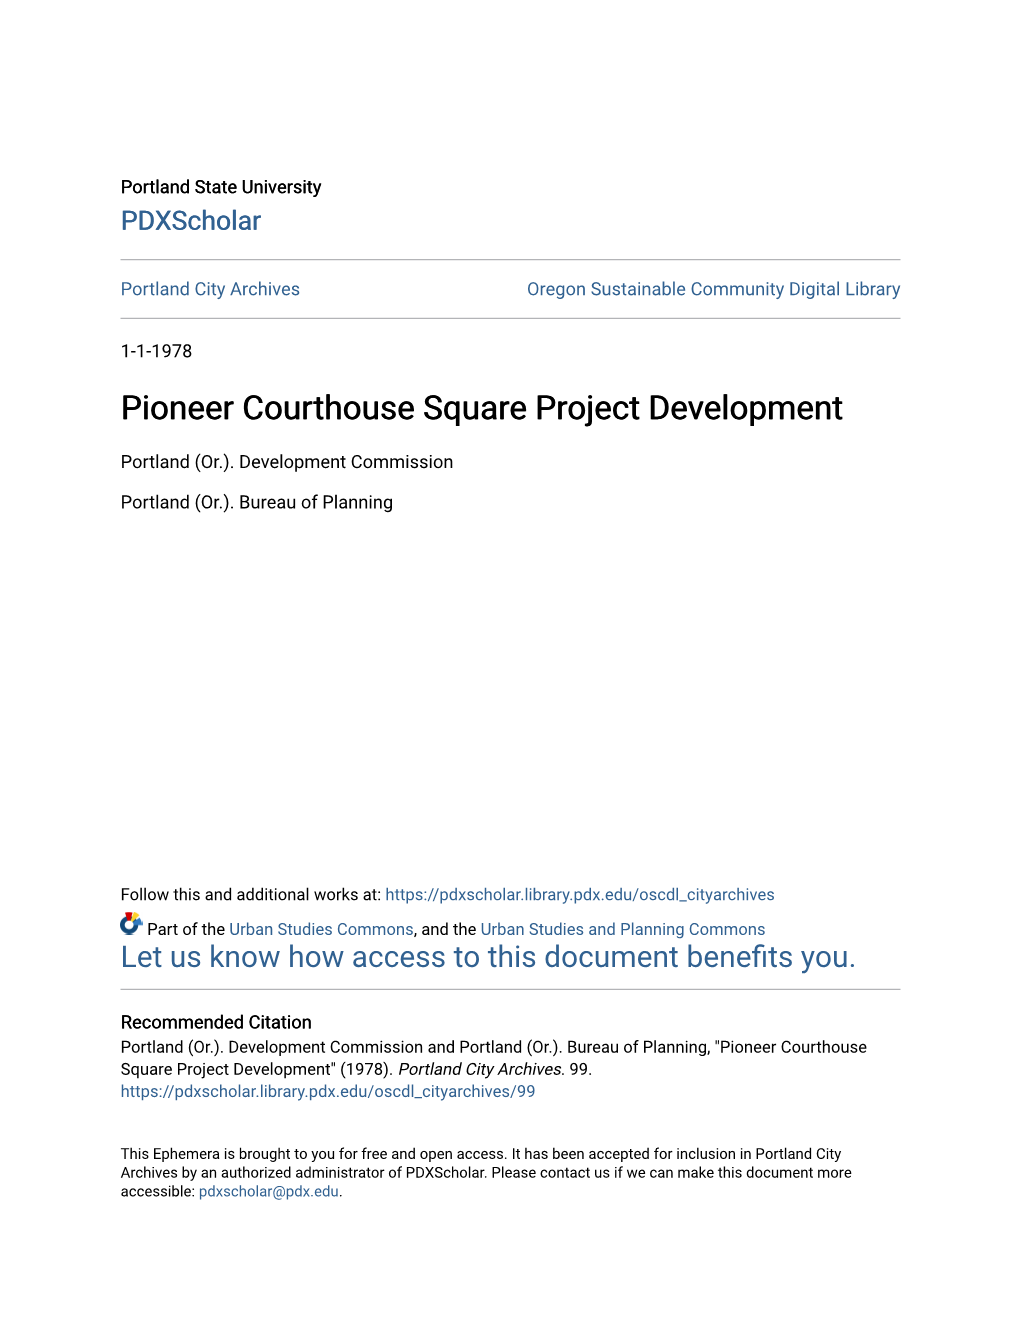 Pioneer Courthouse Square Project Development